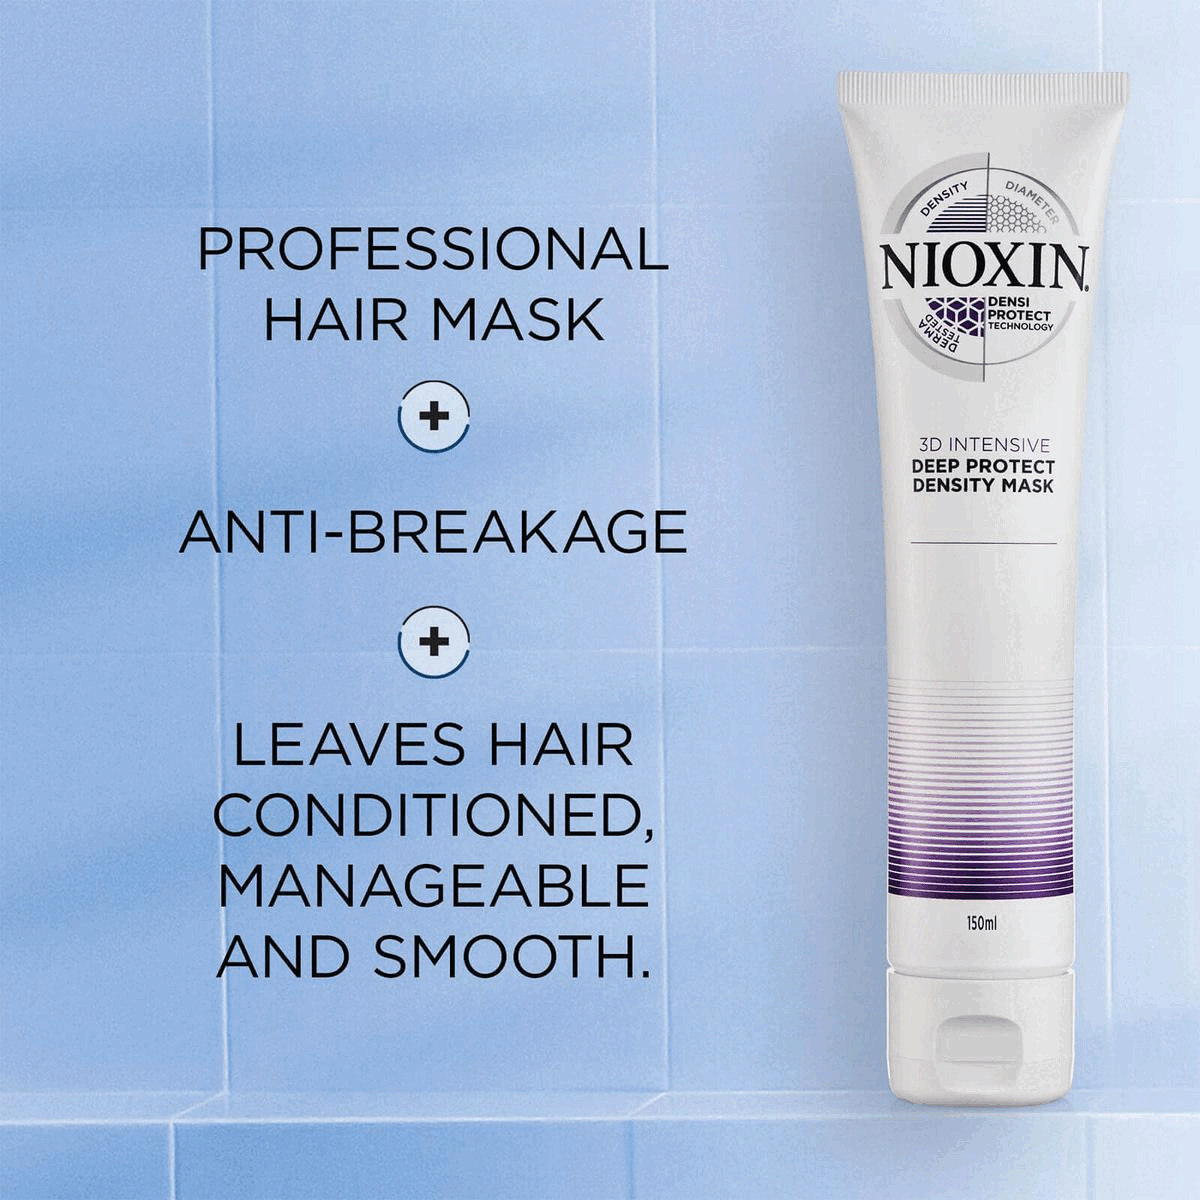 Volume Mousse + Provides Manageable body and hold + helps to style hair into thicker styles How to use Nioxin bodifying foam? A volume mousse for creating thicker hairstyles 1. Shake before use 2. Apply mousse to damp or towel-dried hair and distribute onto hair
            3. Dry the hair to get the volume and define the movement Pro thick technology NIOXIN the no1. salon brand for thicker, fuller hair

            